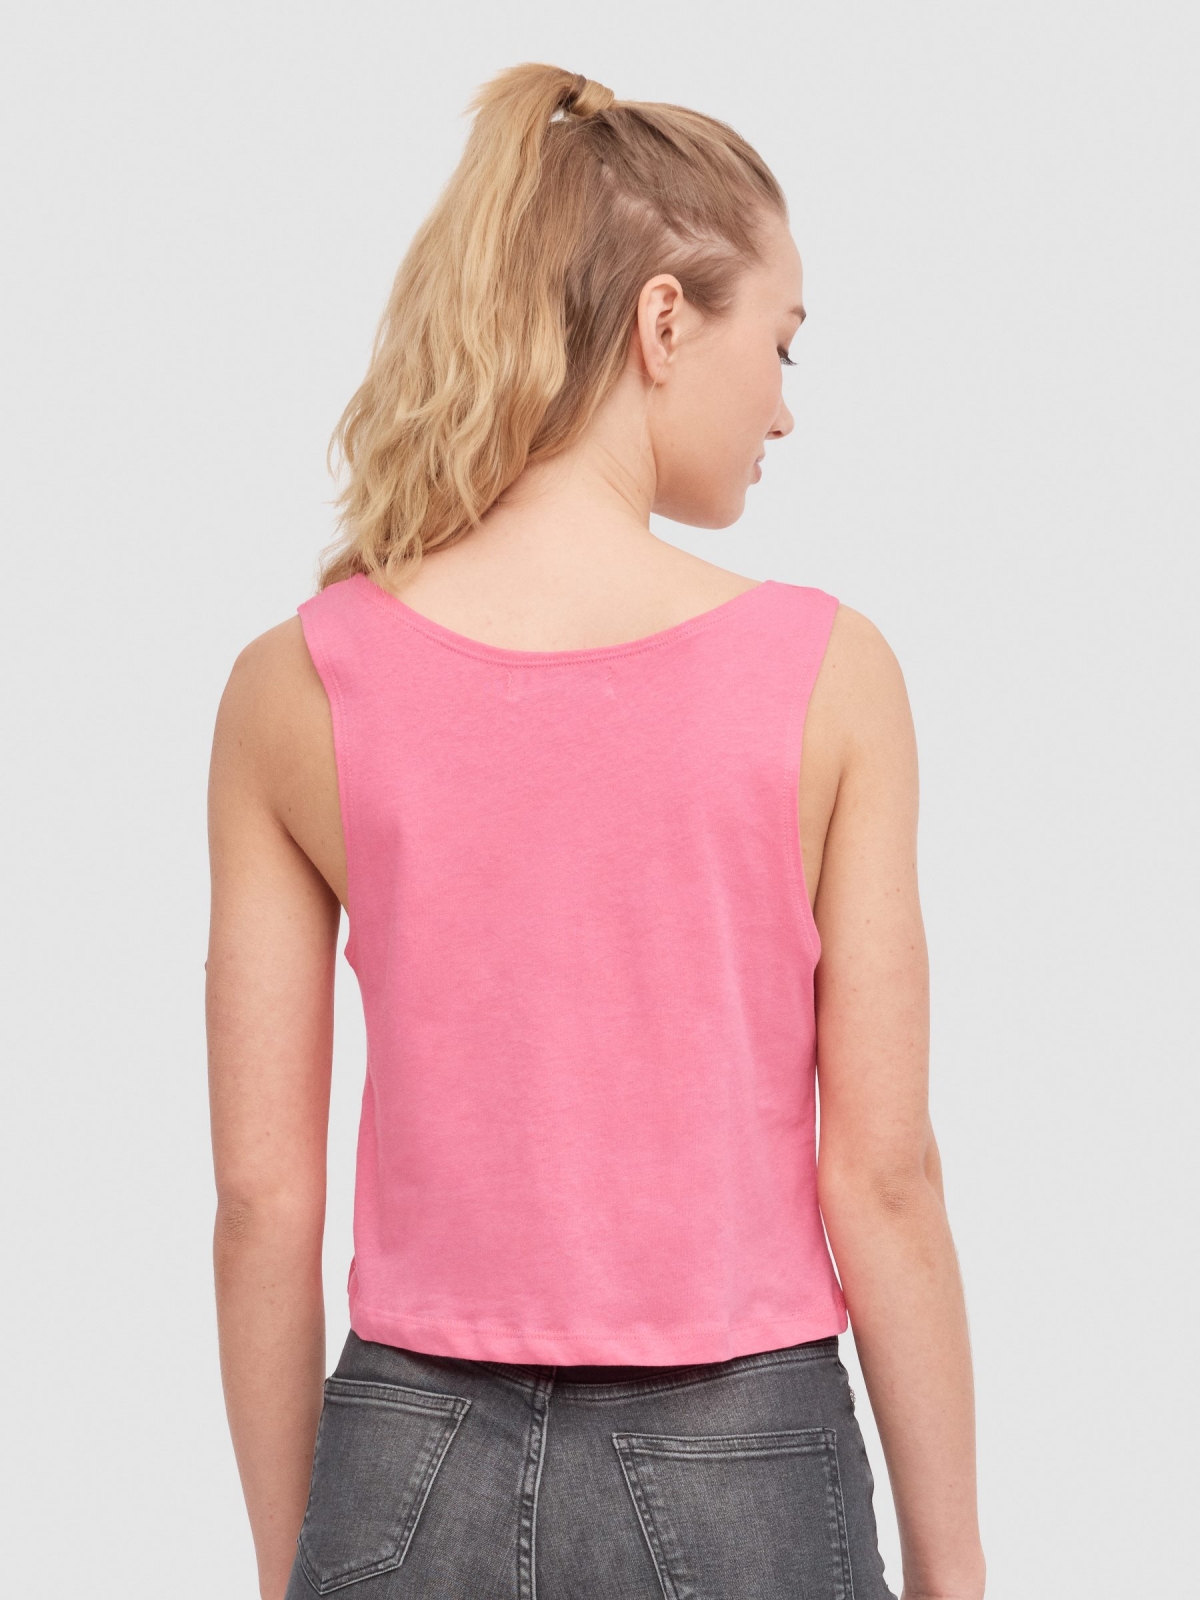 Good Vibes tank top pink middle back view